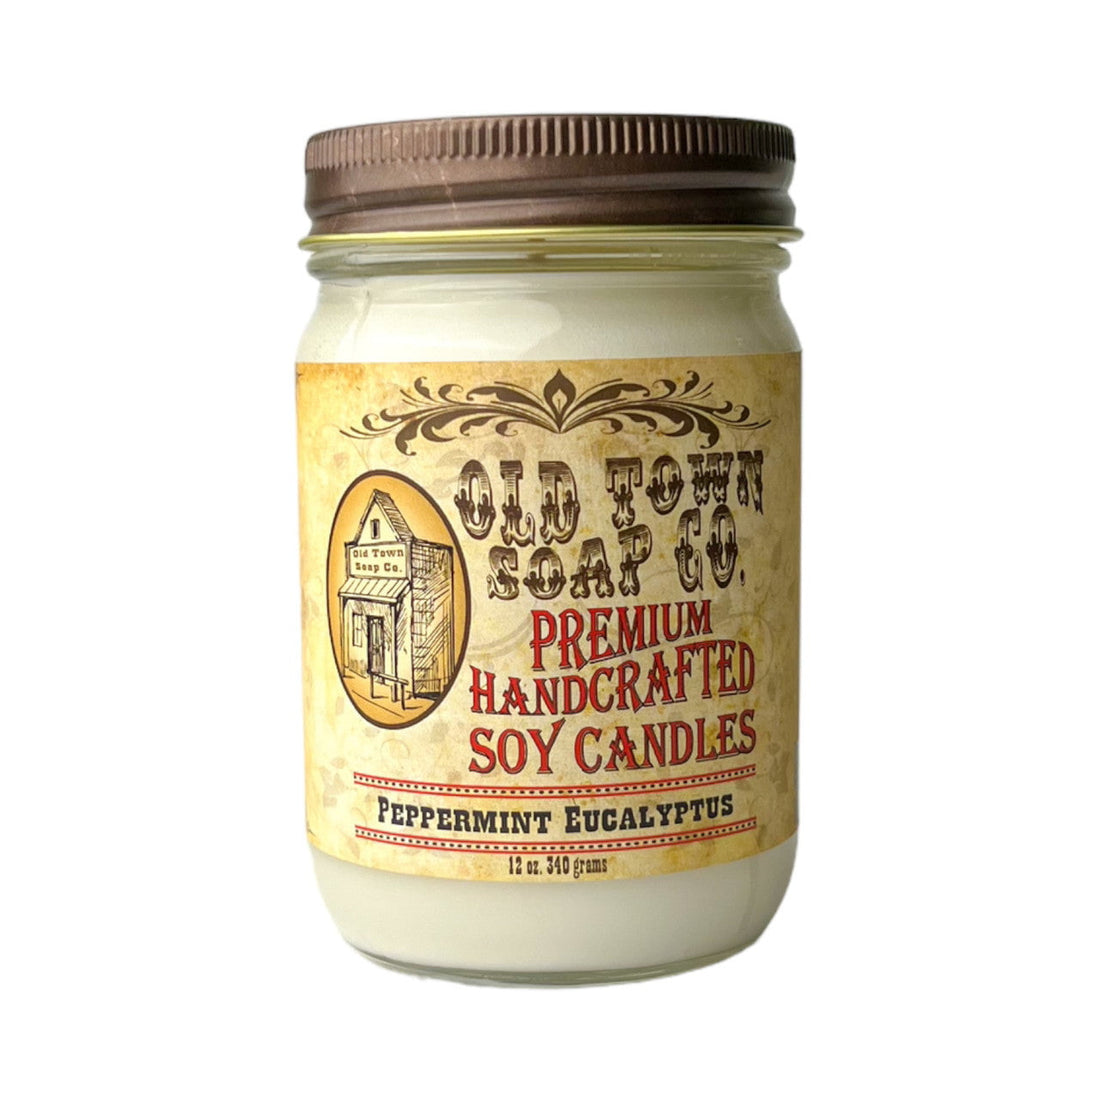 Peppermint Eucalyptus - 12oz. Candles - Old Town Soap Co.